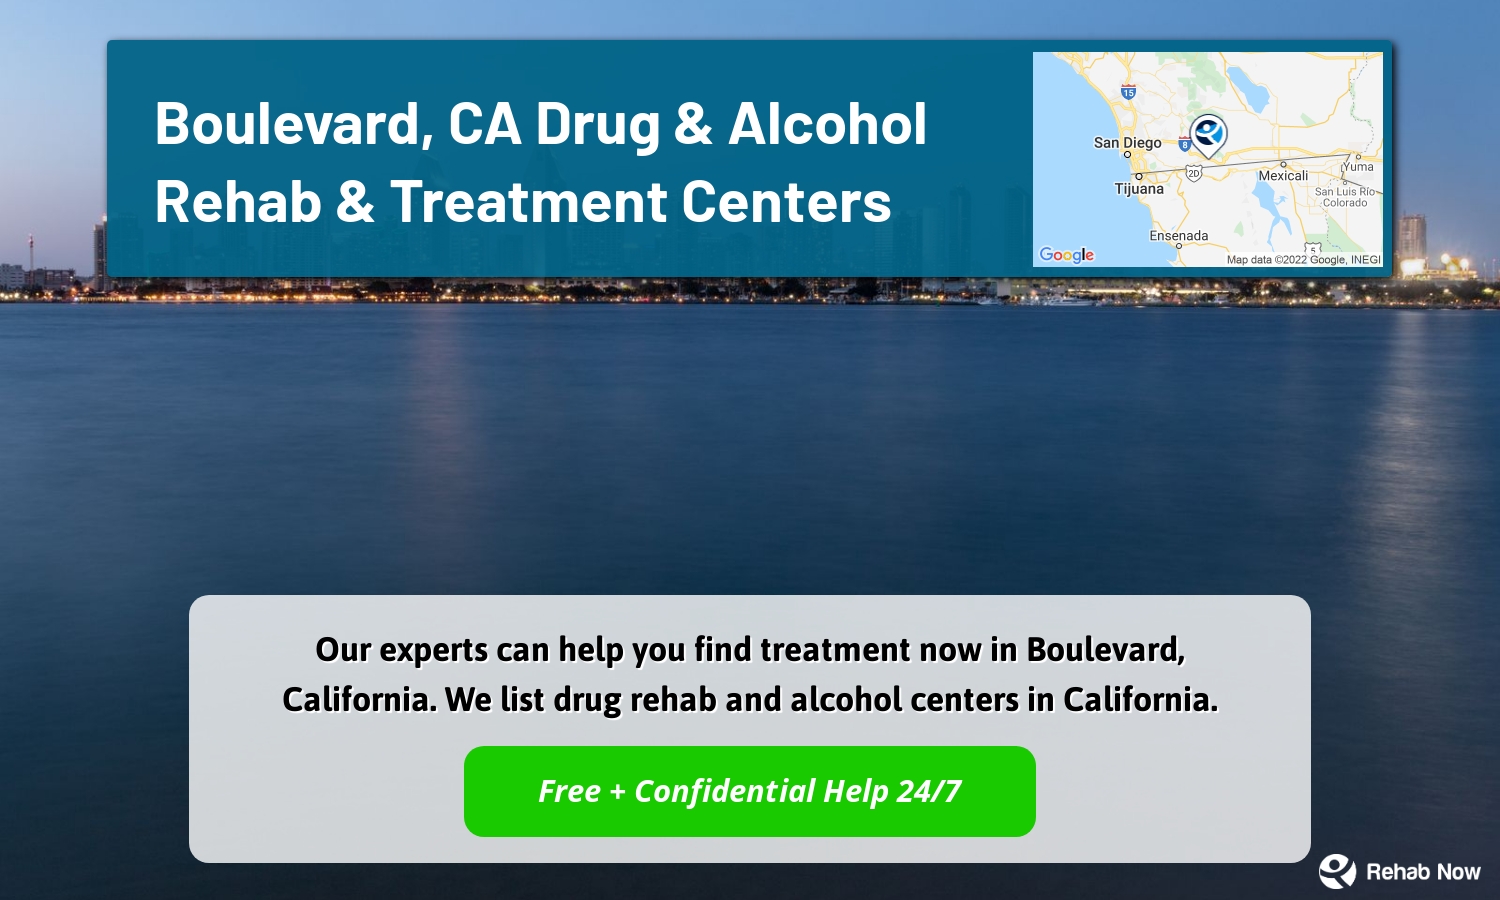 Our experts can help you find treatment now in Boulevard, California. We list drug rehab and alcohol centers in California.